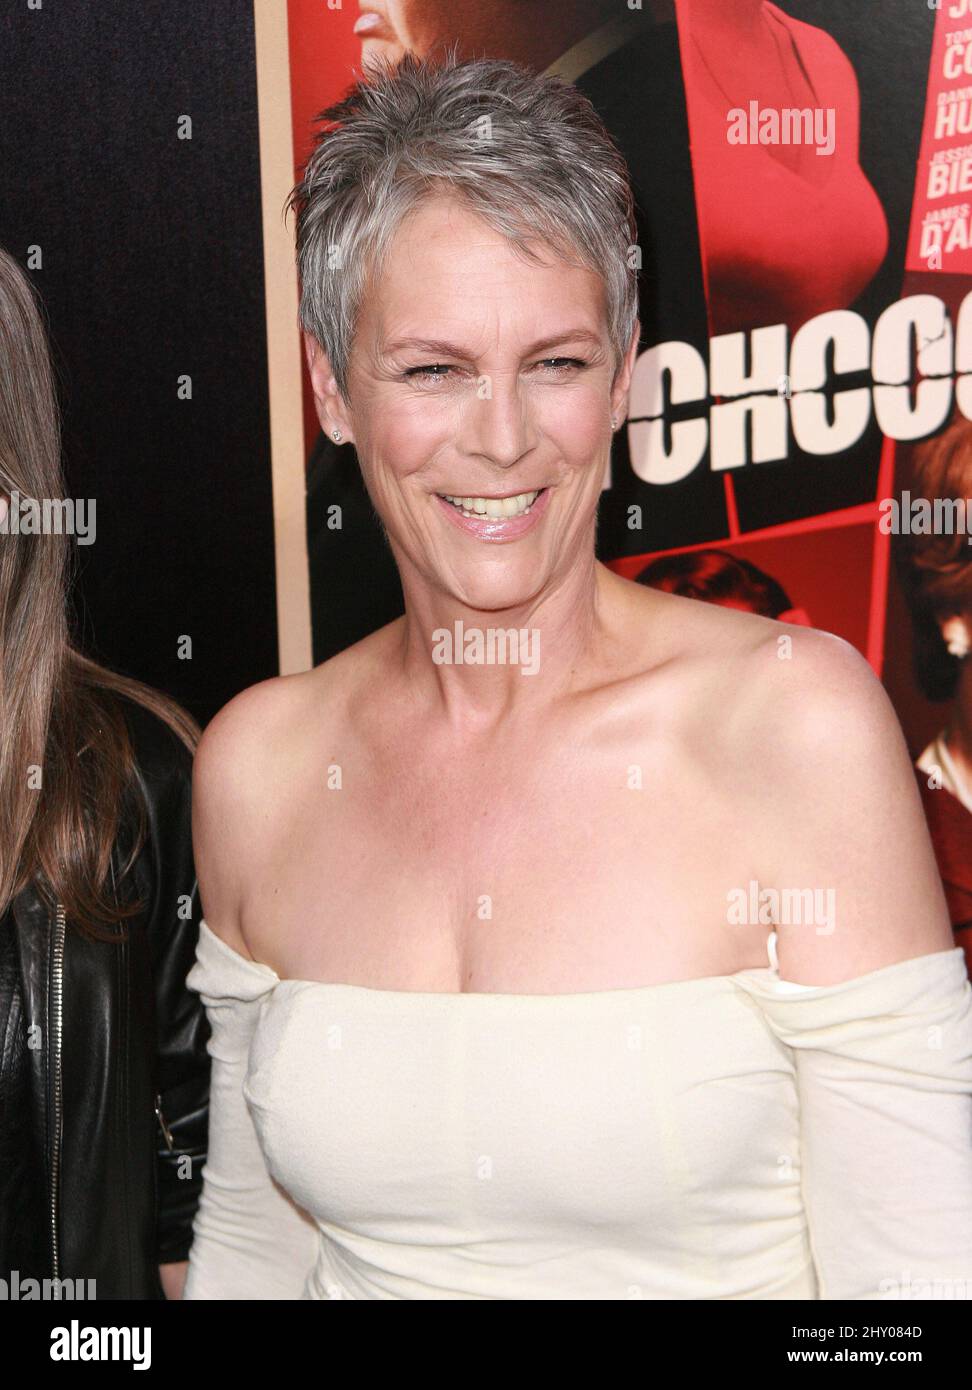 Jamie Lee Curtis attending the Hitchcock Premiere held at Samuel Goldwyn Theater at Academy Of Motion Pictures Arts And Sciences in Los Angeles, USA. Stock Photo